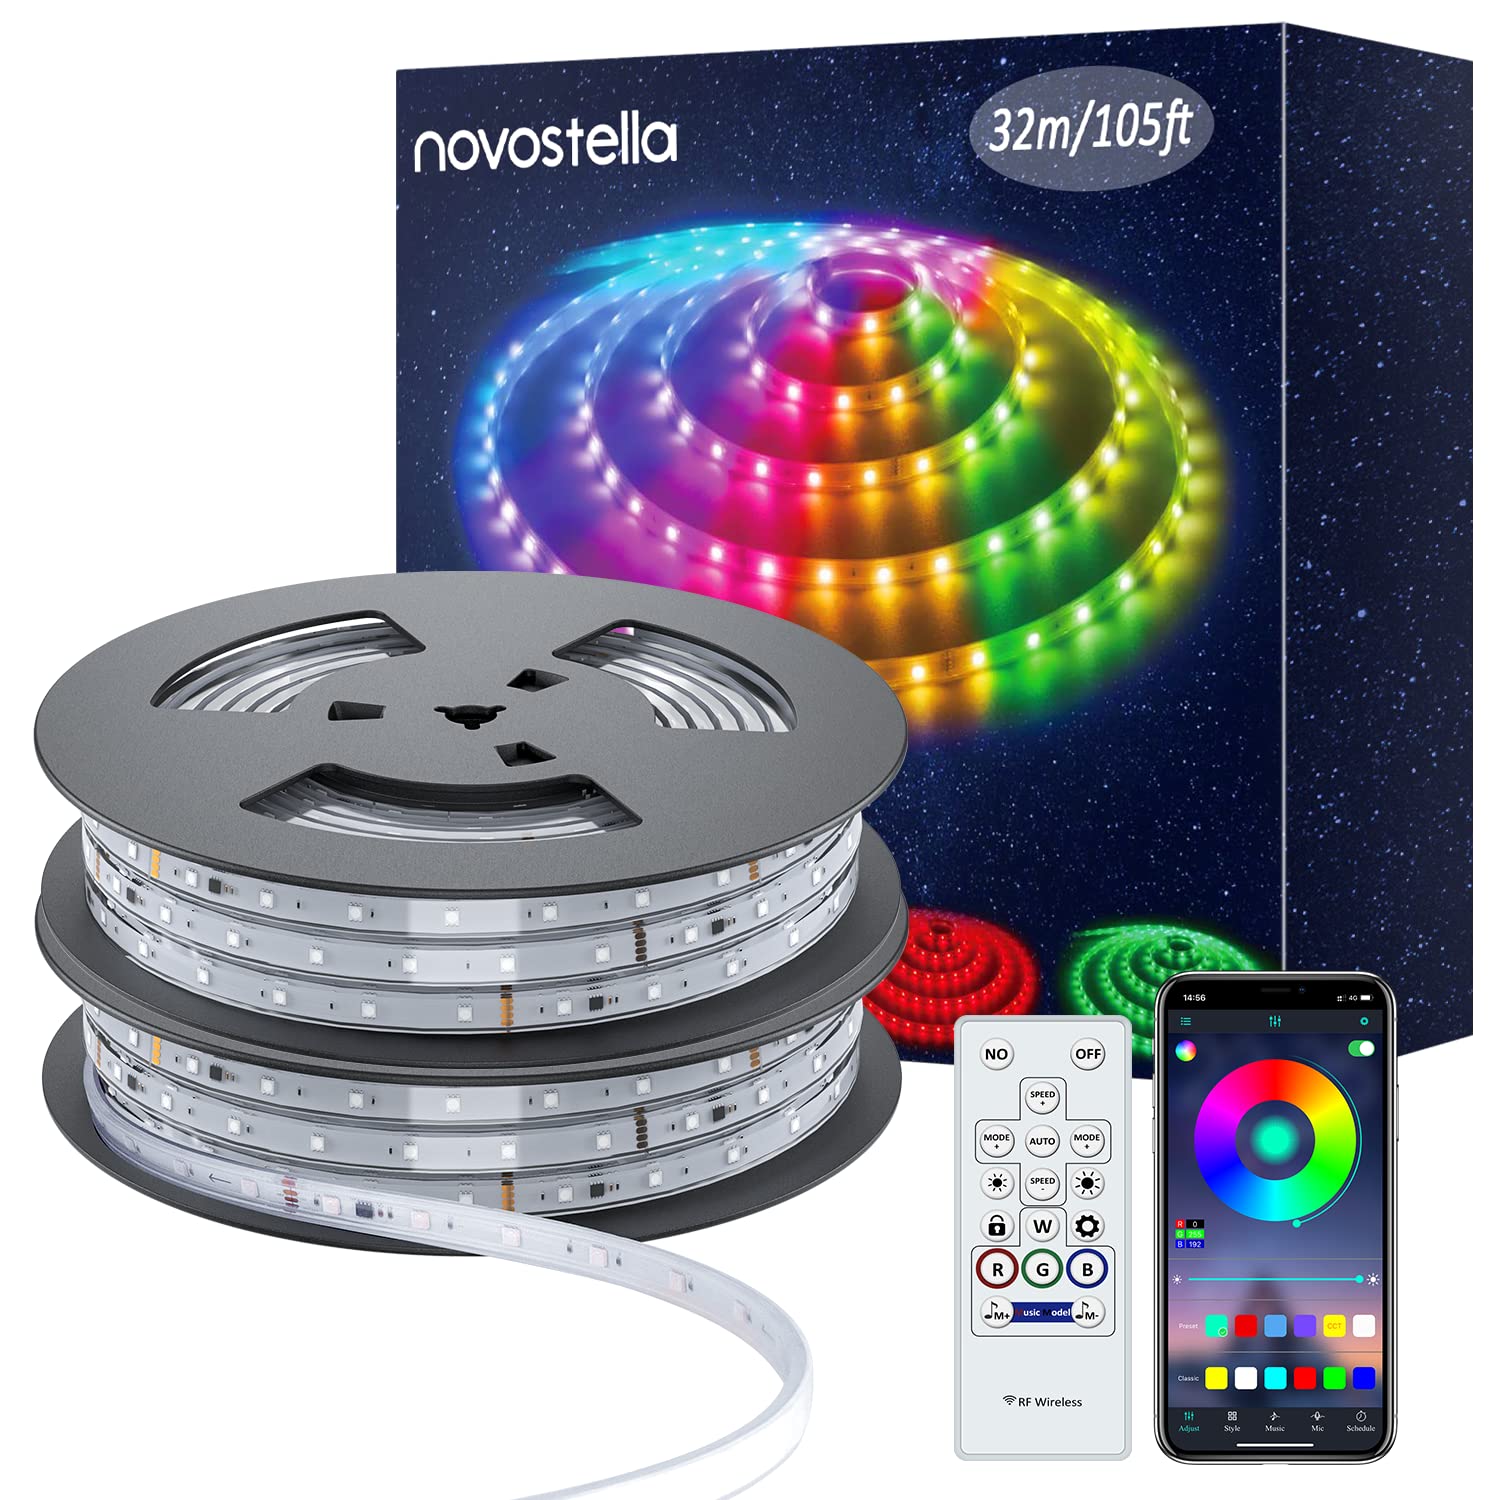 Novostella 32M Outdoors LED Strip Lights, IP65 Waterproof 24V 105ft (52.5x2) RGBIC Rainbow Effects Rope Lights, Smart App or RF Remote Control, Music Sync Colour Changing for Outside Stage Party